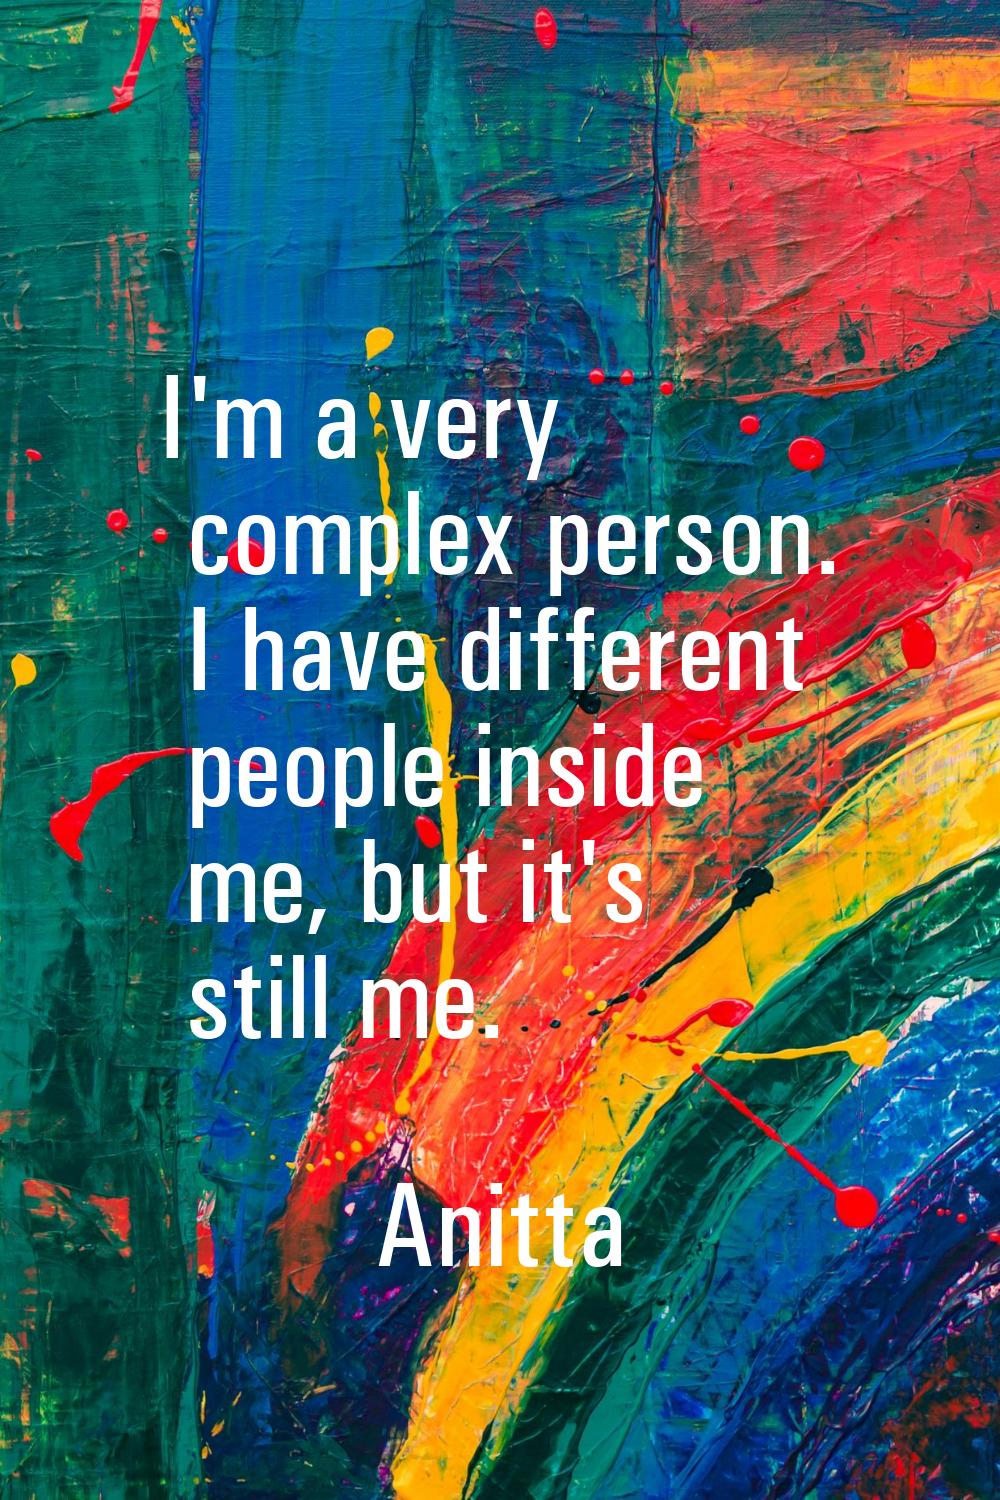 I'm a very complex person. I have different people inside me, but it's still me.